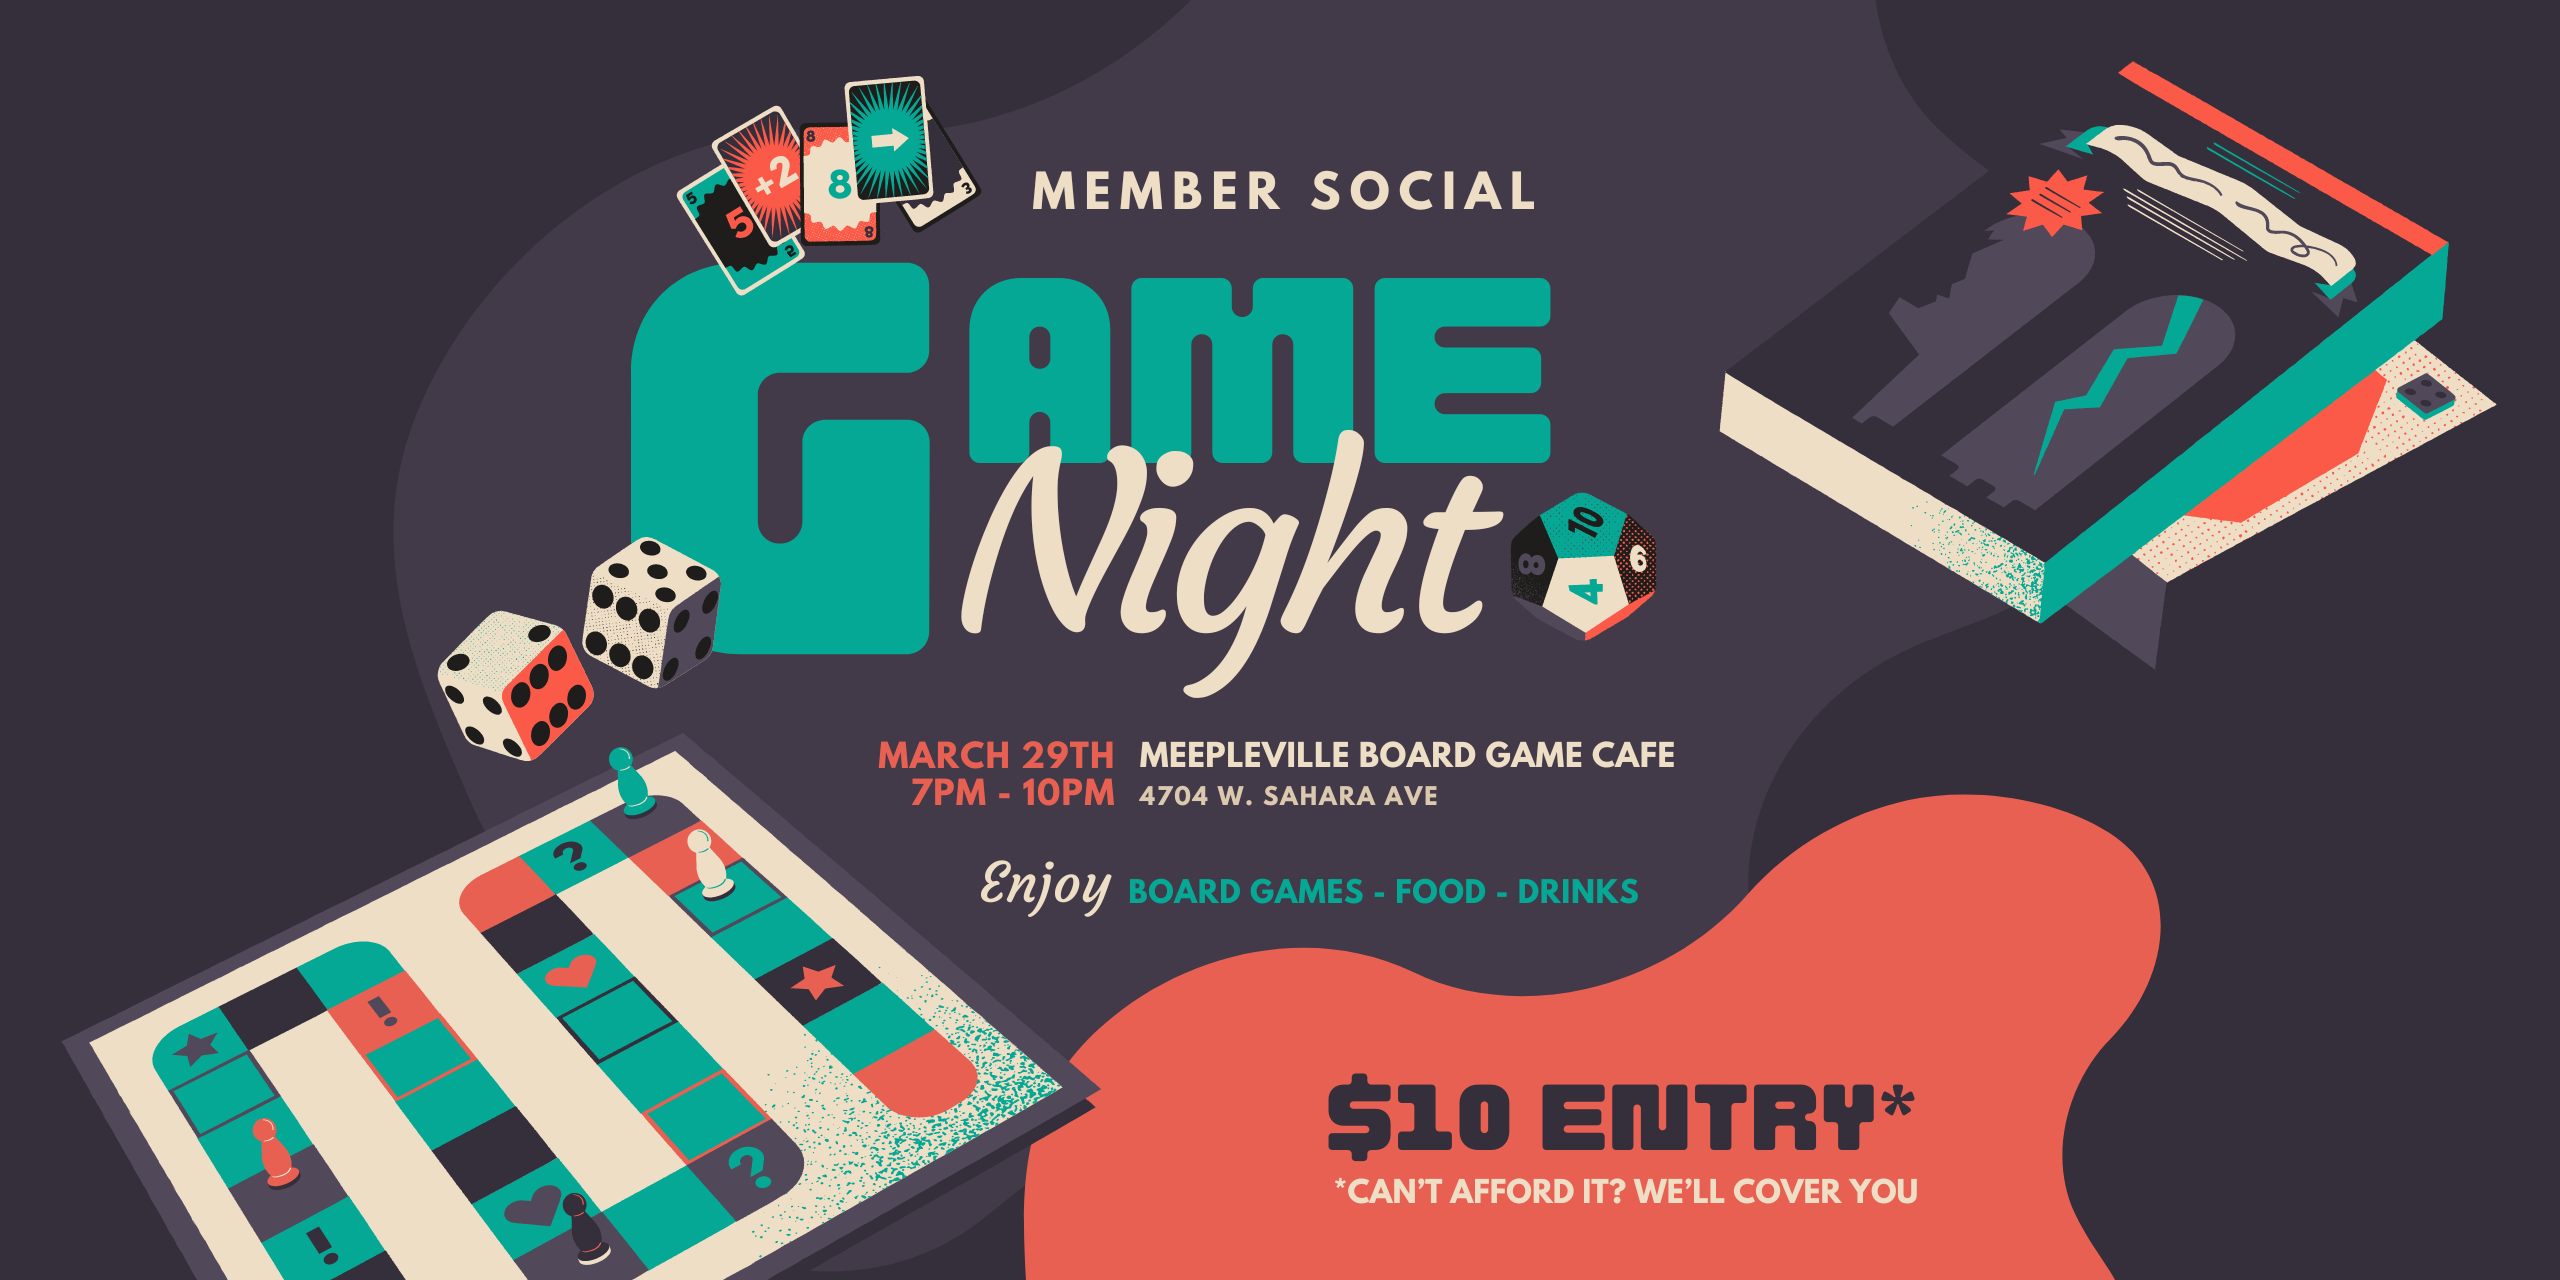 Image with board game pieces and the following information: Member Social Game Night. March 29th 7:00pm - 10:00pm. Meepleville Board Game Cafe. 4704 West Sahara Avenue. Enjoy board games, food, and drink. $10 entry. Can't afford it? We'll cover you.